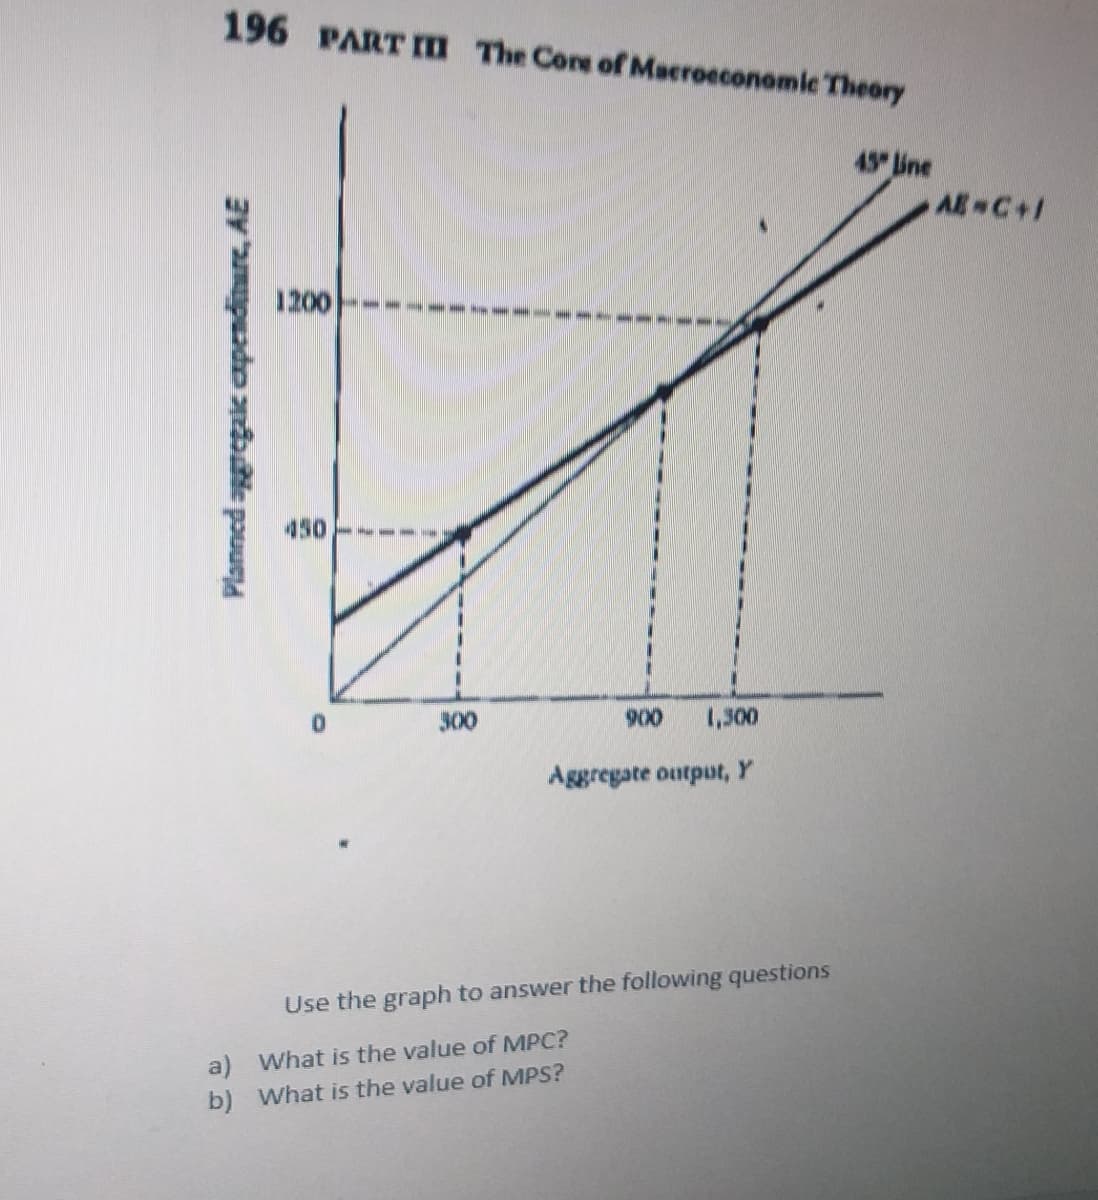 196 PART II The Core of Macroeconomic Theory
45 line
A C+1
1200
450
300
900
1,300
Aggregate output, Y
Use the graph to answer the following questions
a) What is the value of MPC?
b) What is the value of MPS?
Planned aggregaic apenditure, AE
